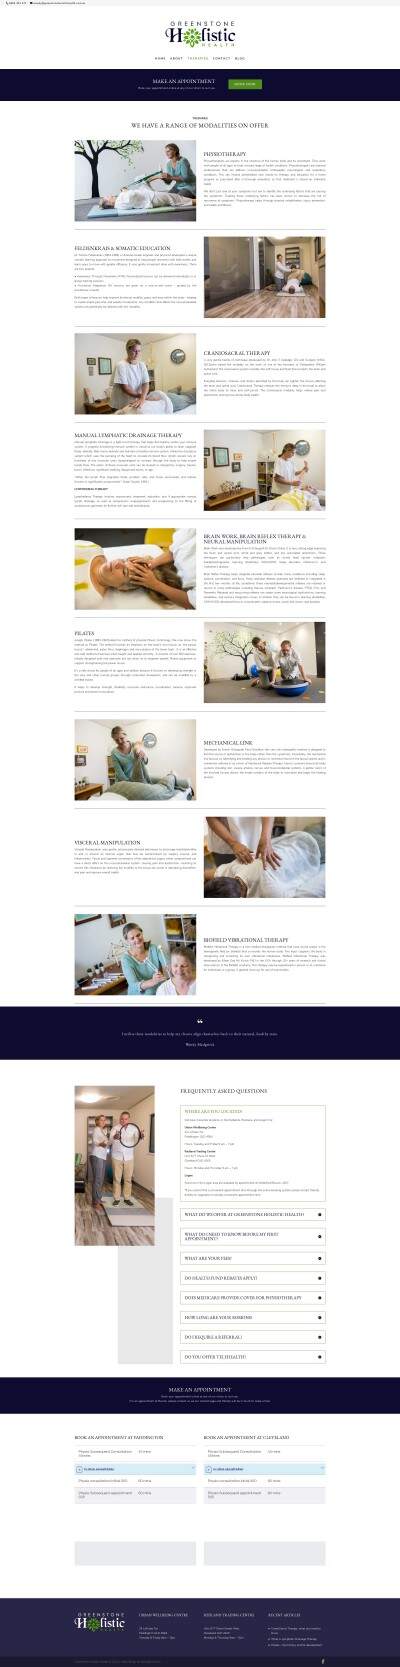 Website Design of Greenstone Holistic Health Services Page